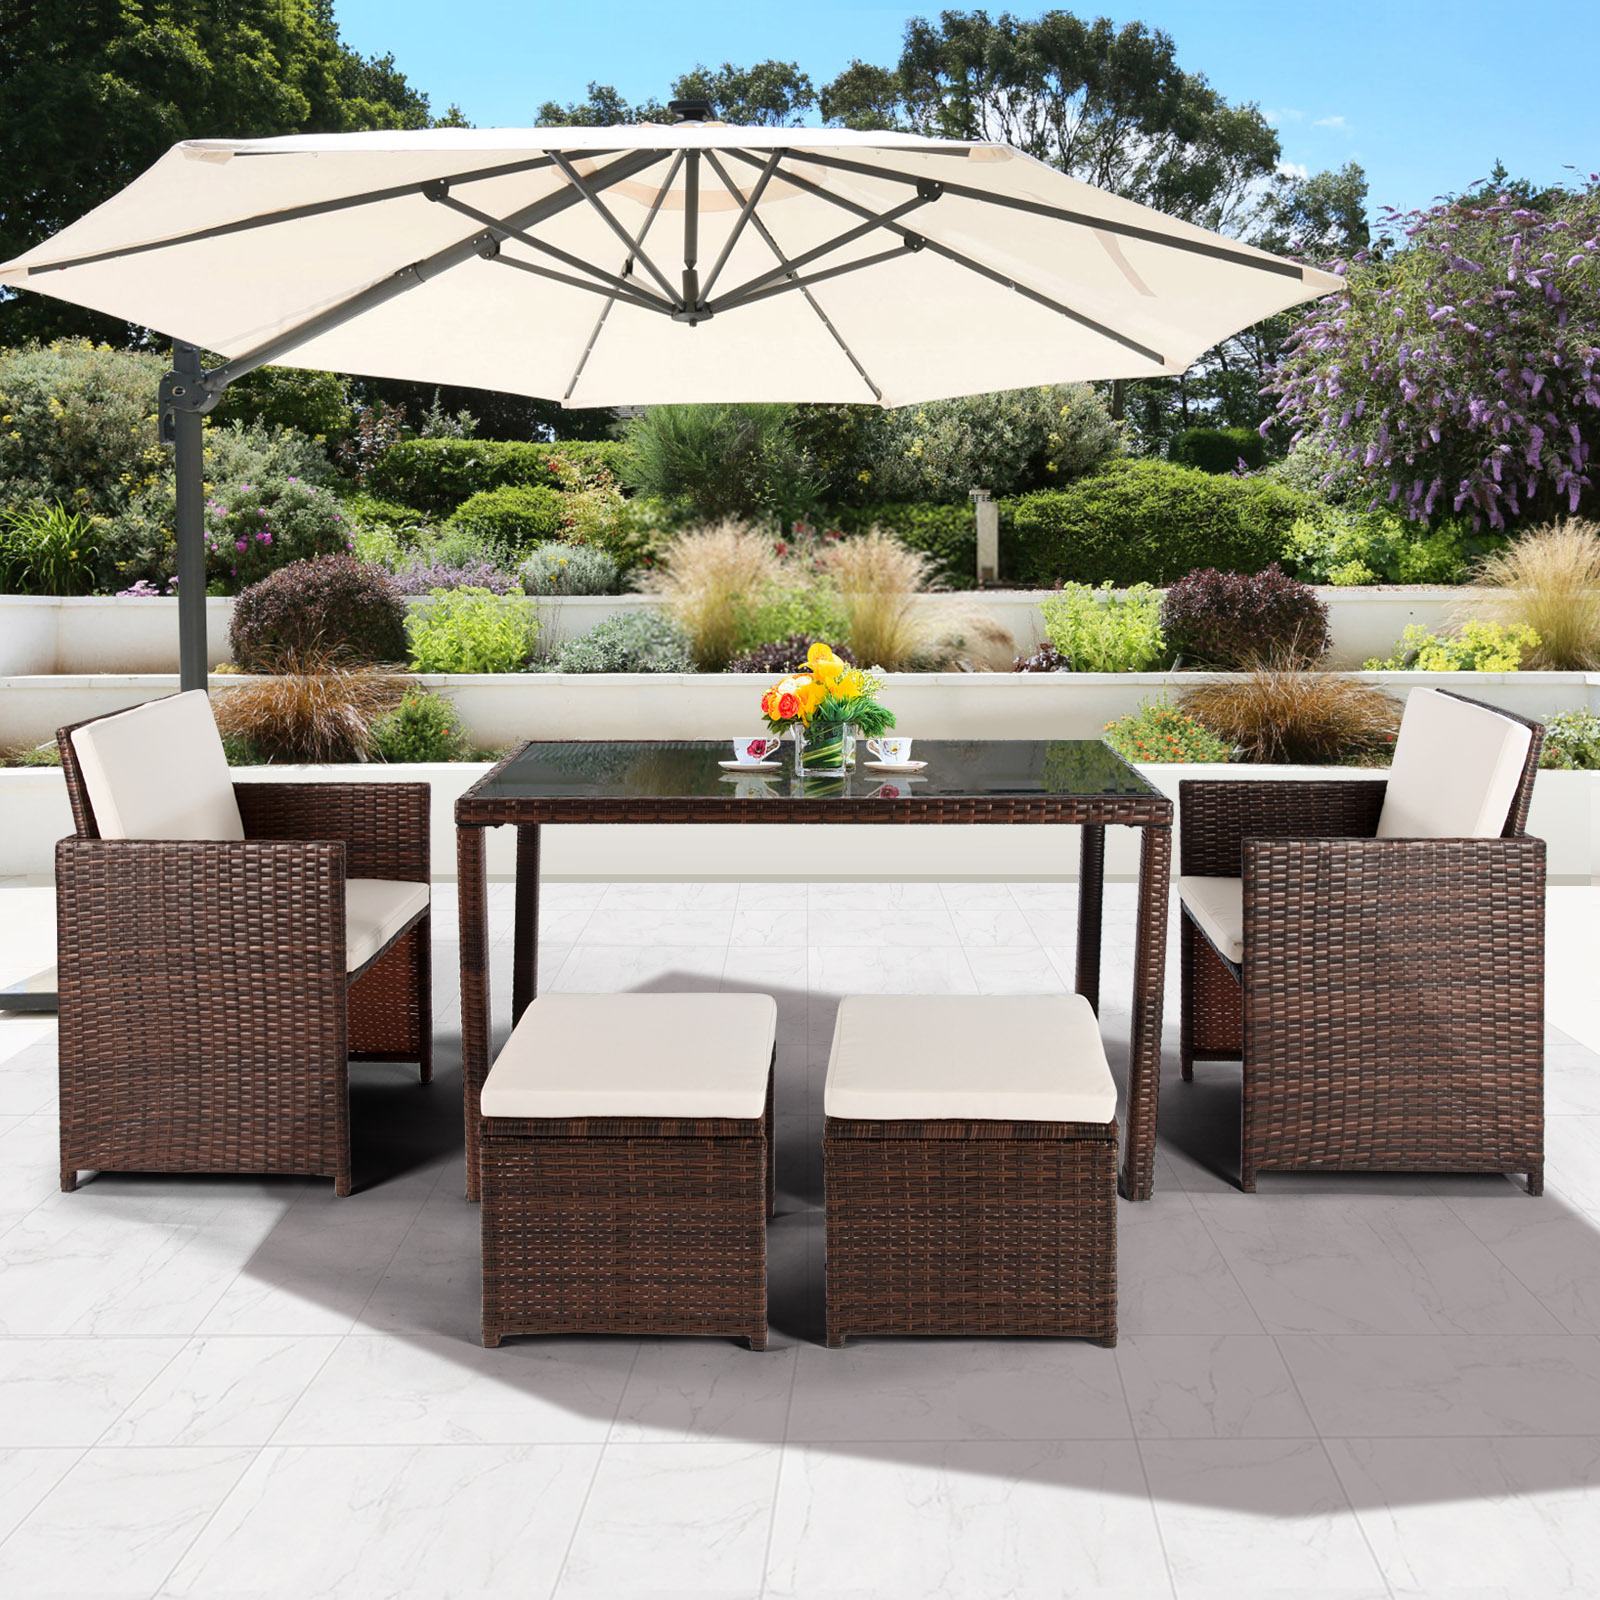 5 Piece Patio Dining Set with 2 Wicker Armchairs, 2 Ottomans, Dining Table, All-Weather Space Saving Patio Conversation Furniture Set with Cushions for Backyard, Lawn, Garden, Poolside, LLL125 - image 1 of 10